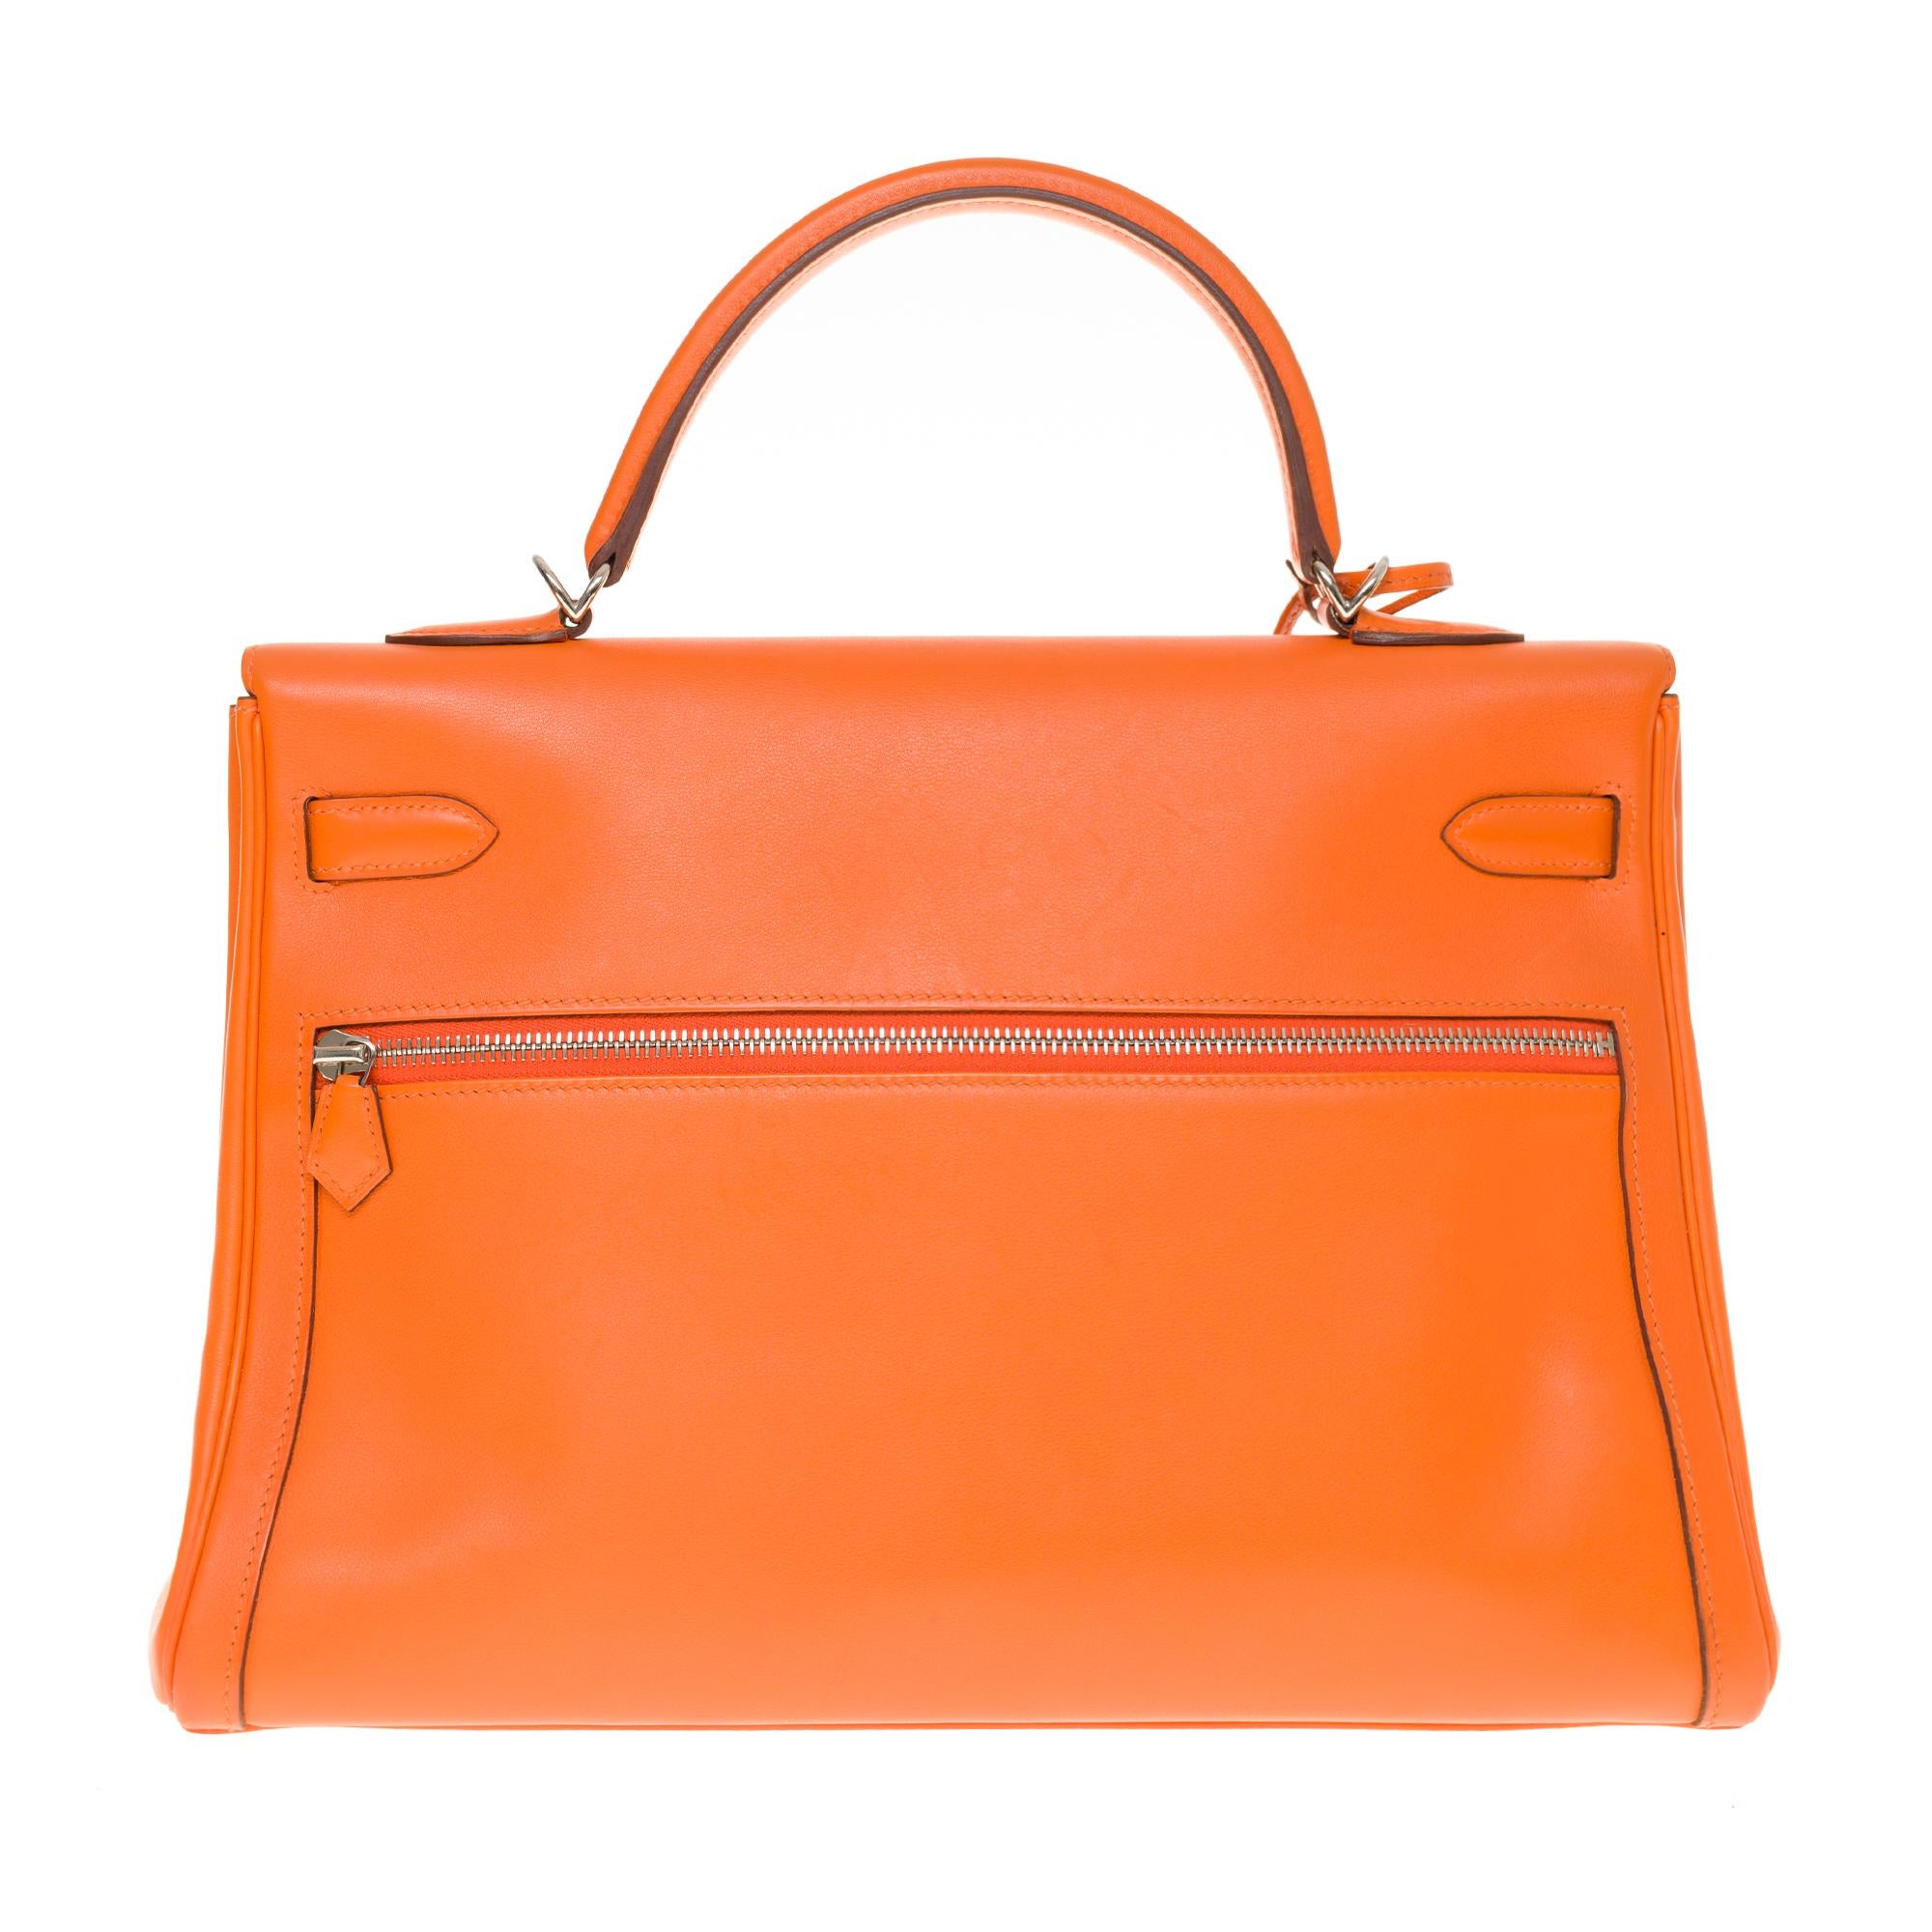 Superb and Rare Hermes Kelly Lakis 35 cm bag in orange swift calfskin, silver plated palladium plated metal trim, simple orange leather handle, a removable orange leather shoulder strap handle allowing a hand or shoulder support.

Closure by